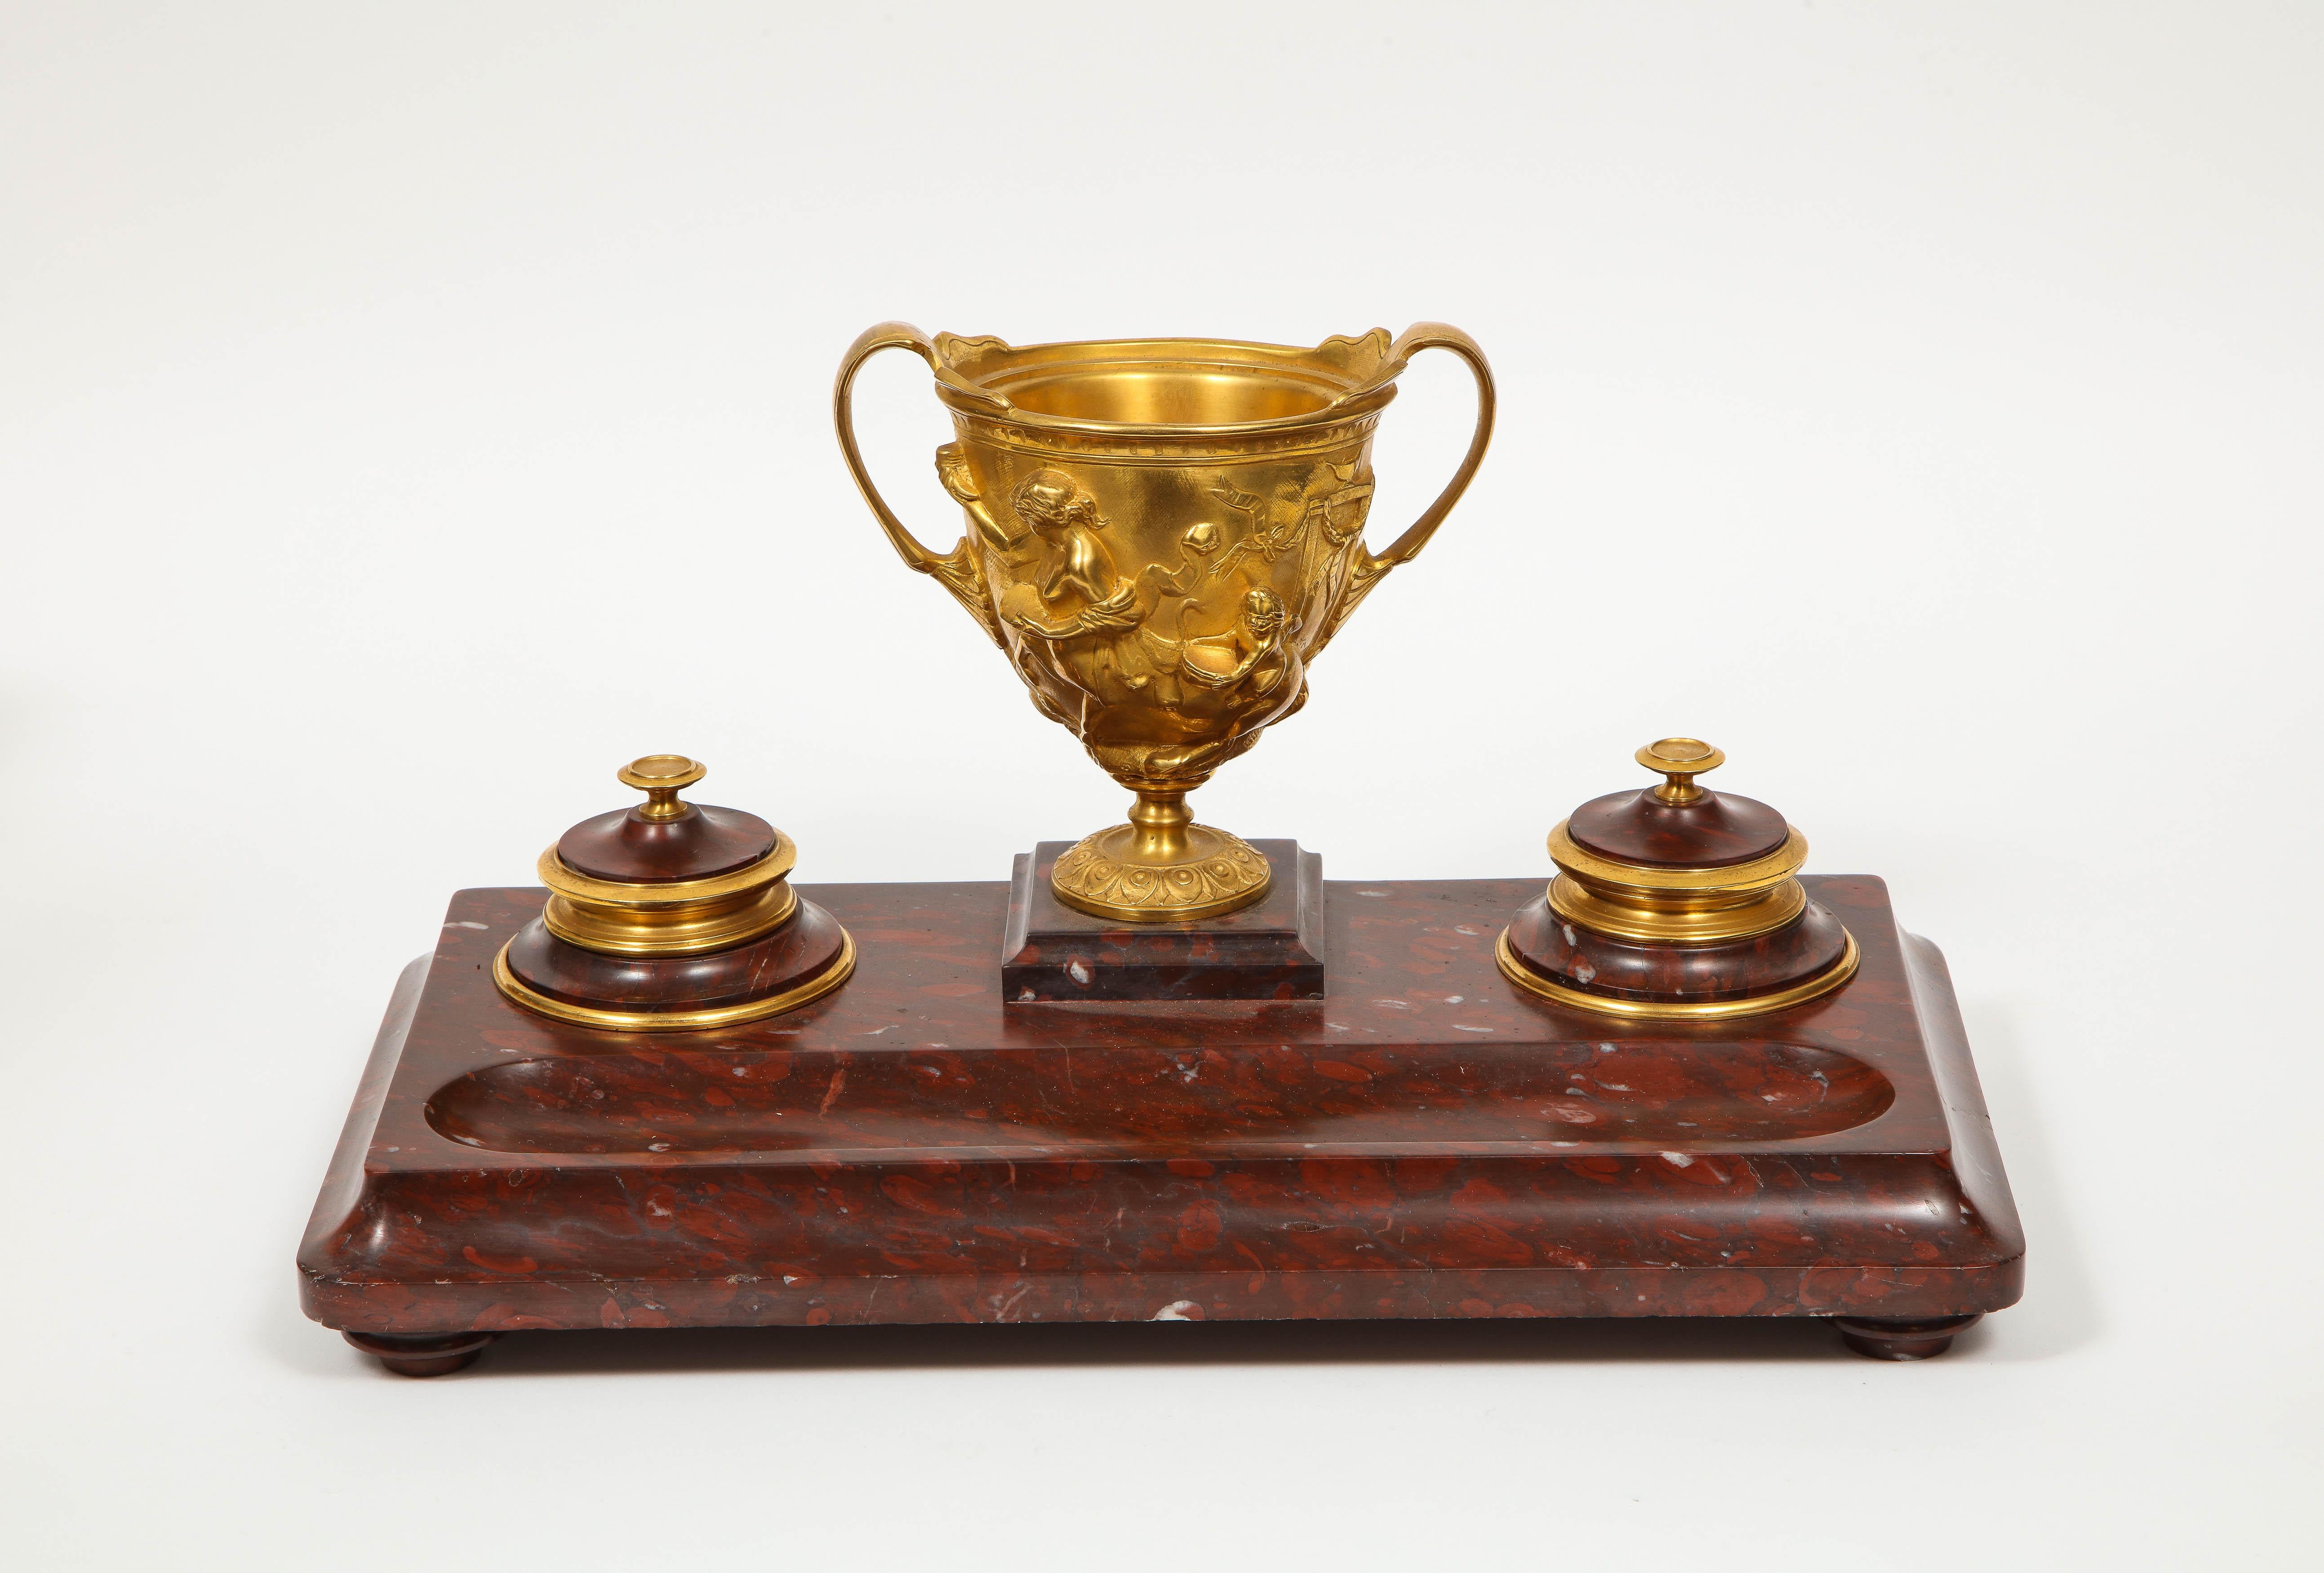 A large rouge marble and gilt bronze inkwell Encrier, attributed to Barbedienne.

Of rectangular form, nice thick rouge marble slate, with gilt bronze mounts and central vase, circa 1890.

Very good condition, missing glass inserts.